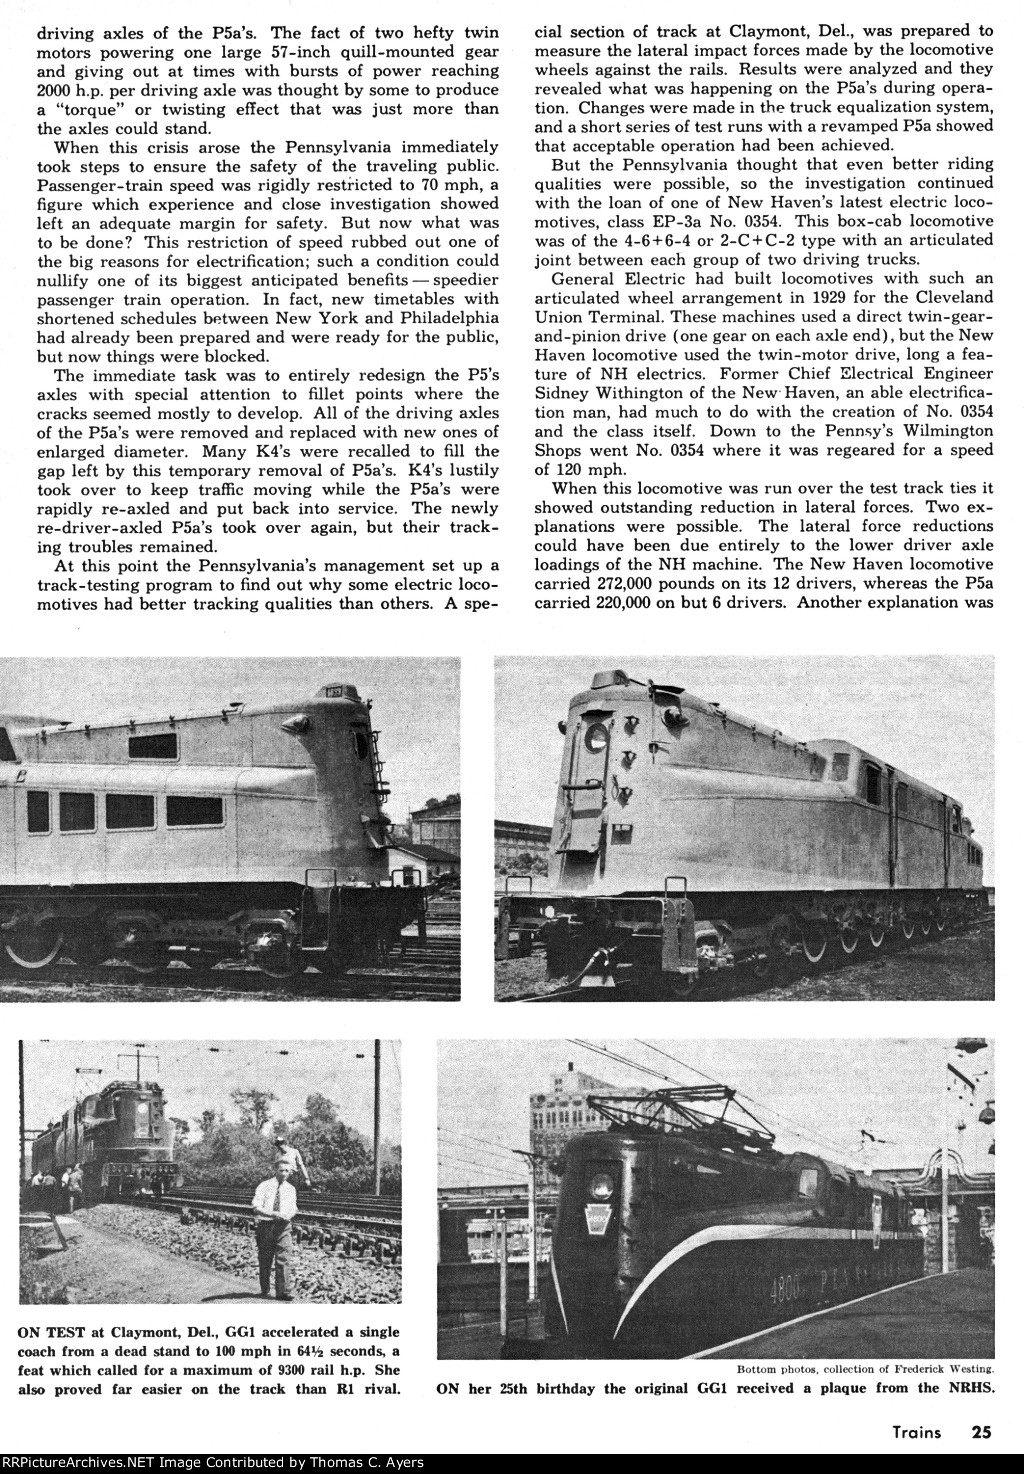 Story Of The GG-1, Page 25, 1964